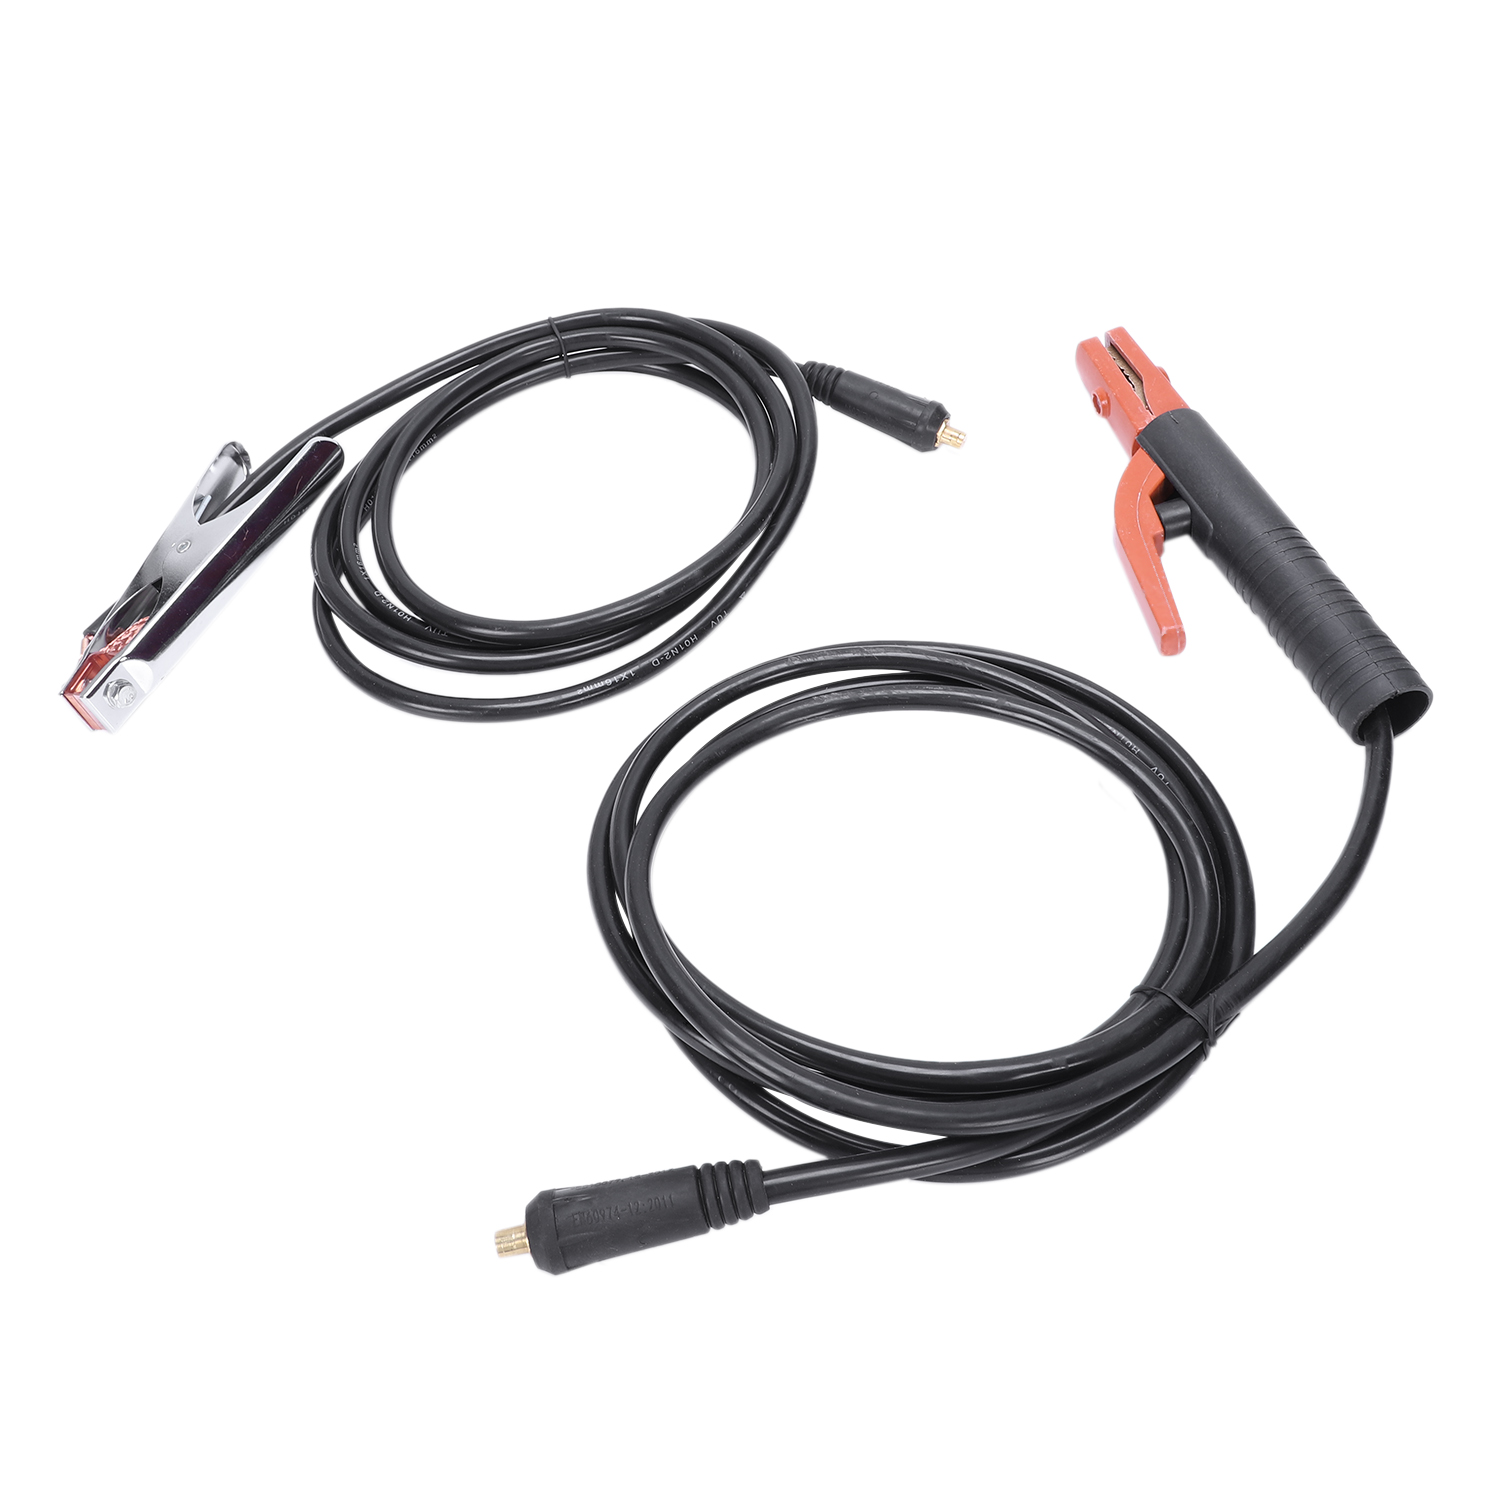 Hot Welding Machine Accessories 300 Amp Electrode Holder 3M Cable+200 Amp Earth Clamp 3M Cable,Both With Dkj10-25 Connector